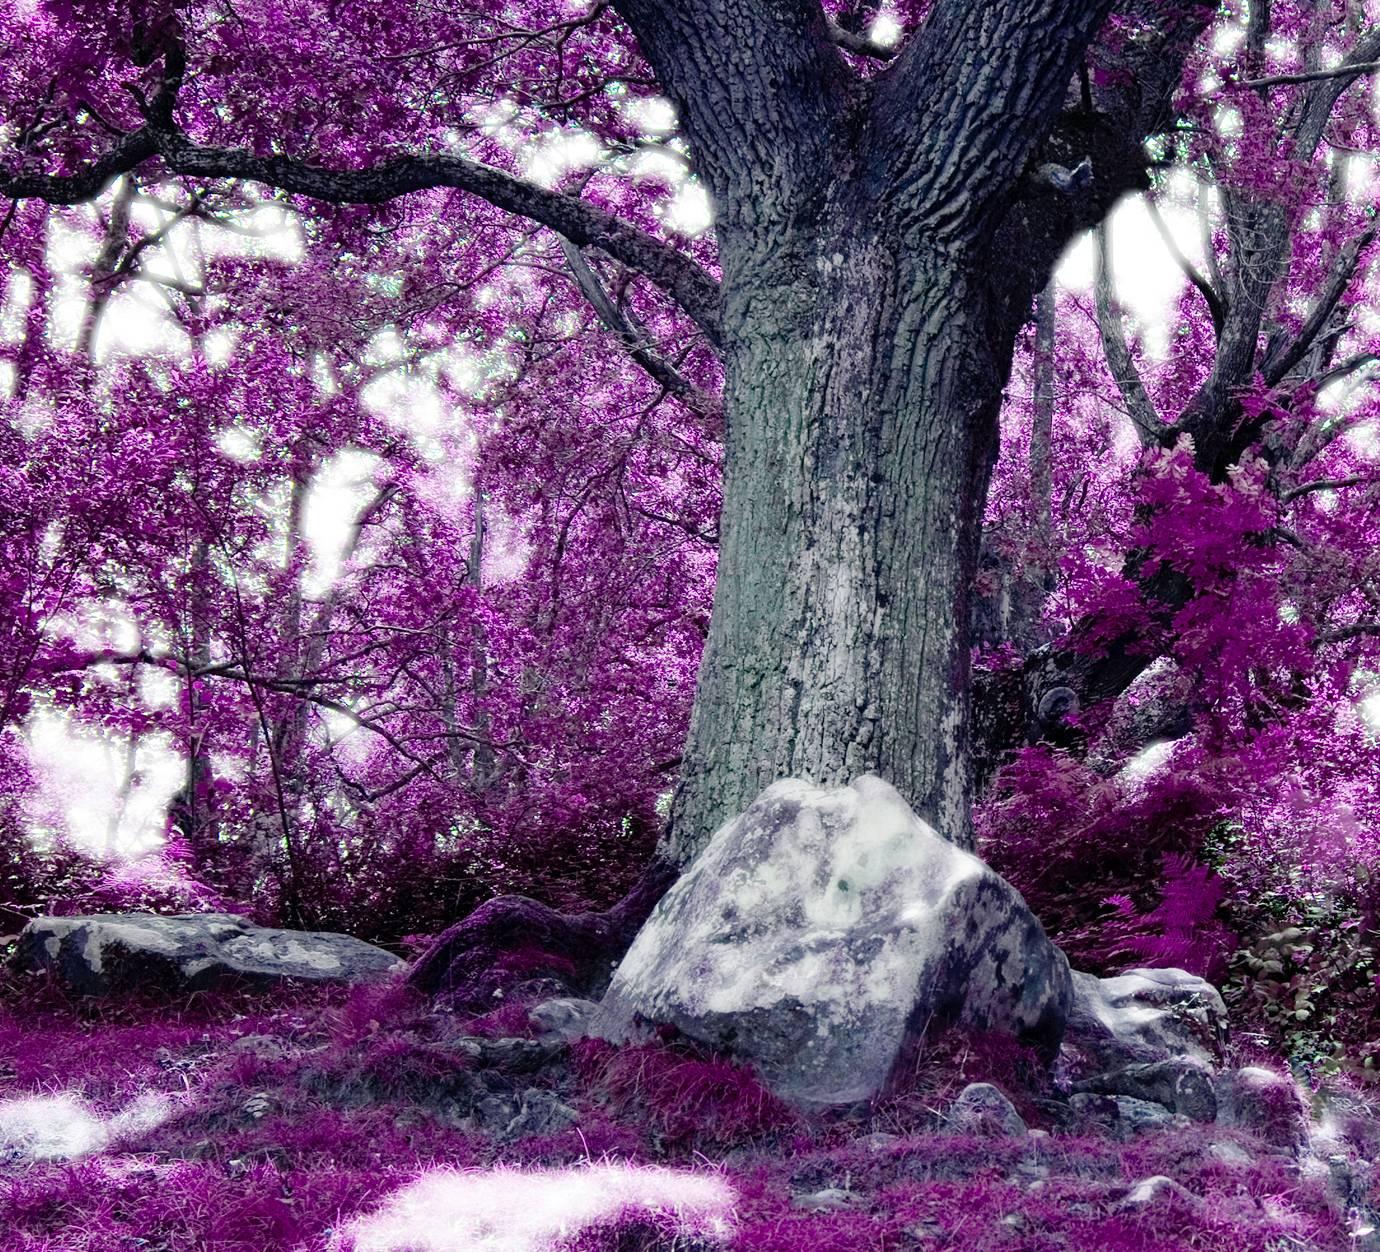 Wonderland, Landscape with old Tree, Magenta/Pink tone - Photograph by Albert Delamour